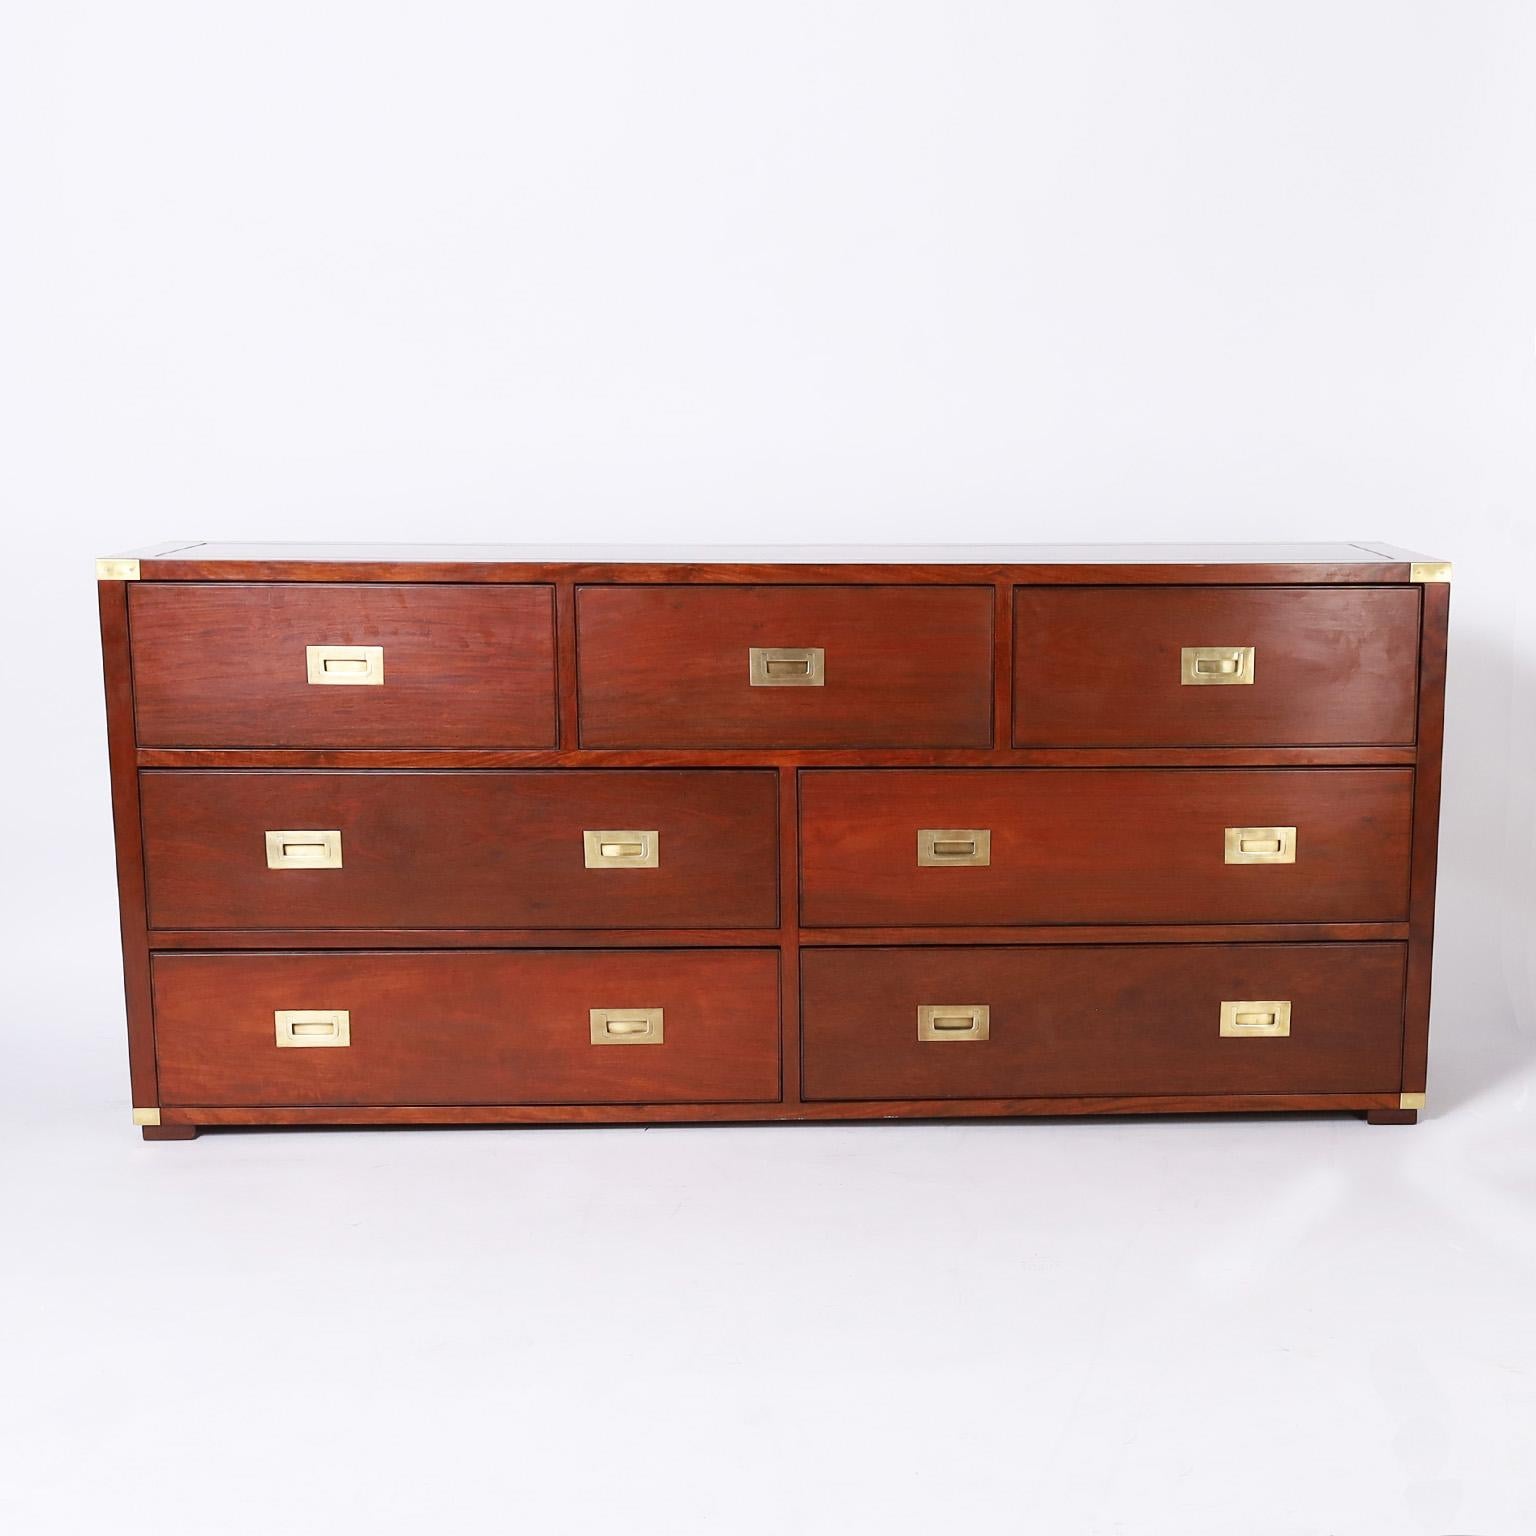 Campaign style chest of drawers or dresser crafted in mahogany in a chic combination of traditional campaign and mid century modern, with plenty of storage, brass hardware, and block feet. This piece was likely made by Charlotte Horstmann of Hong